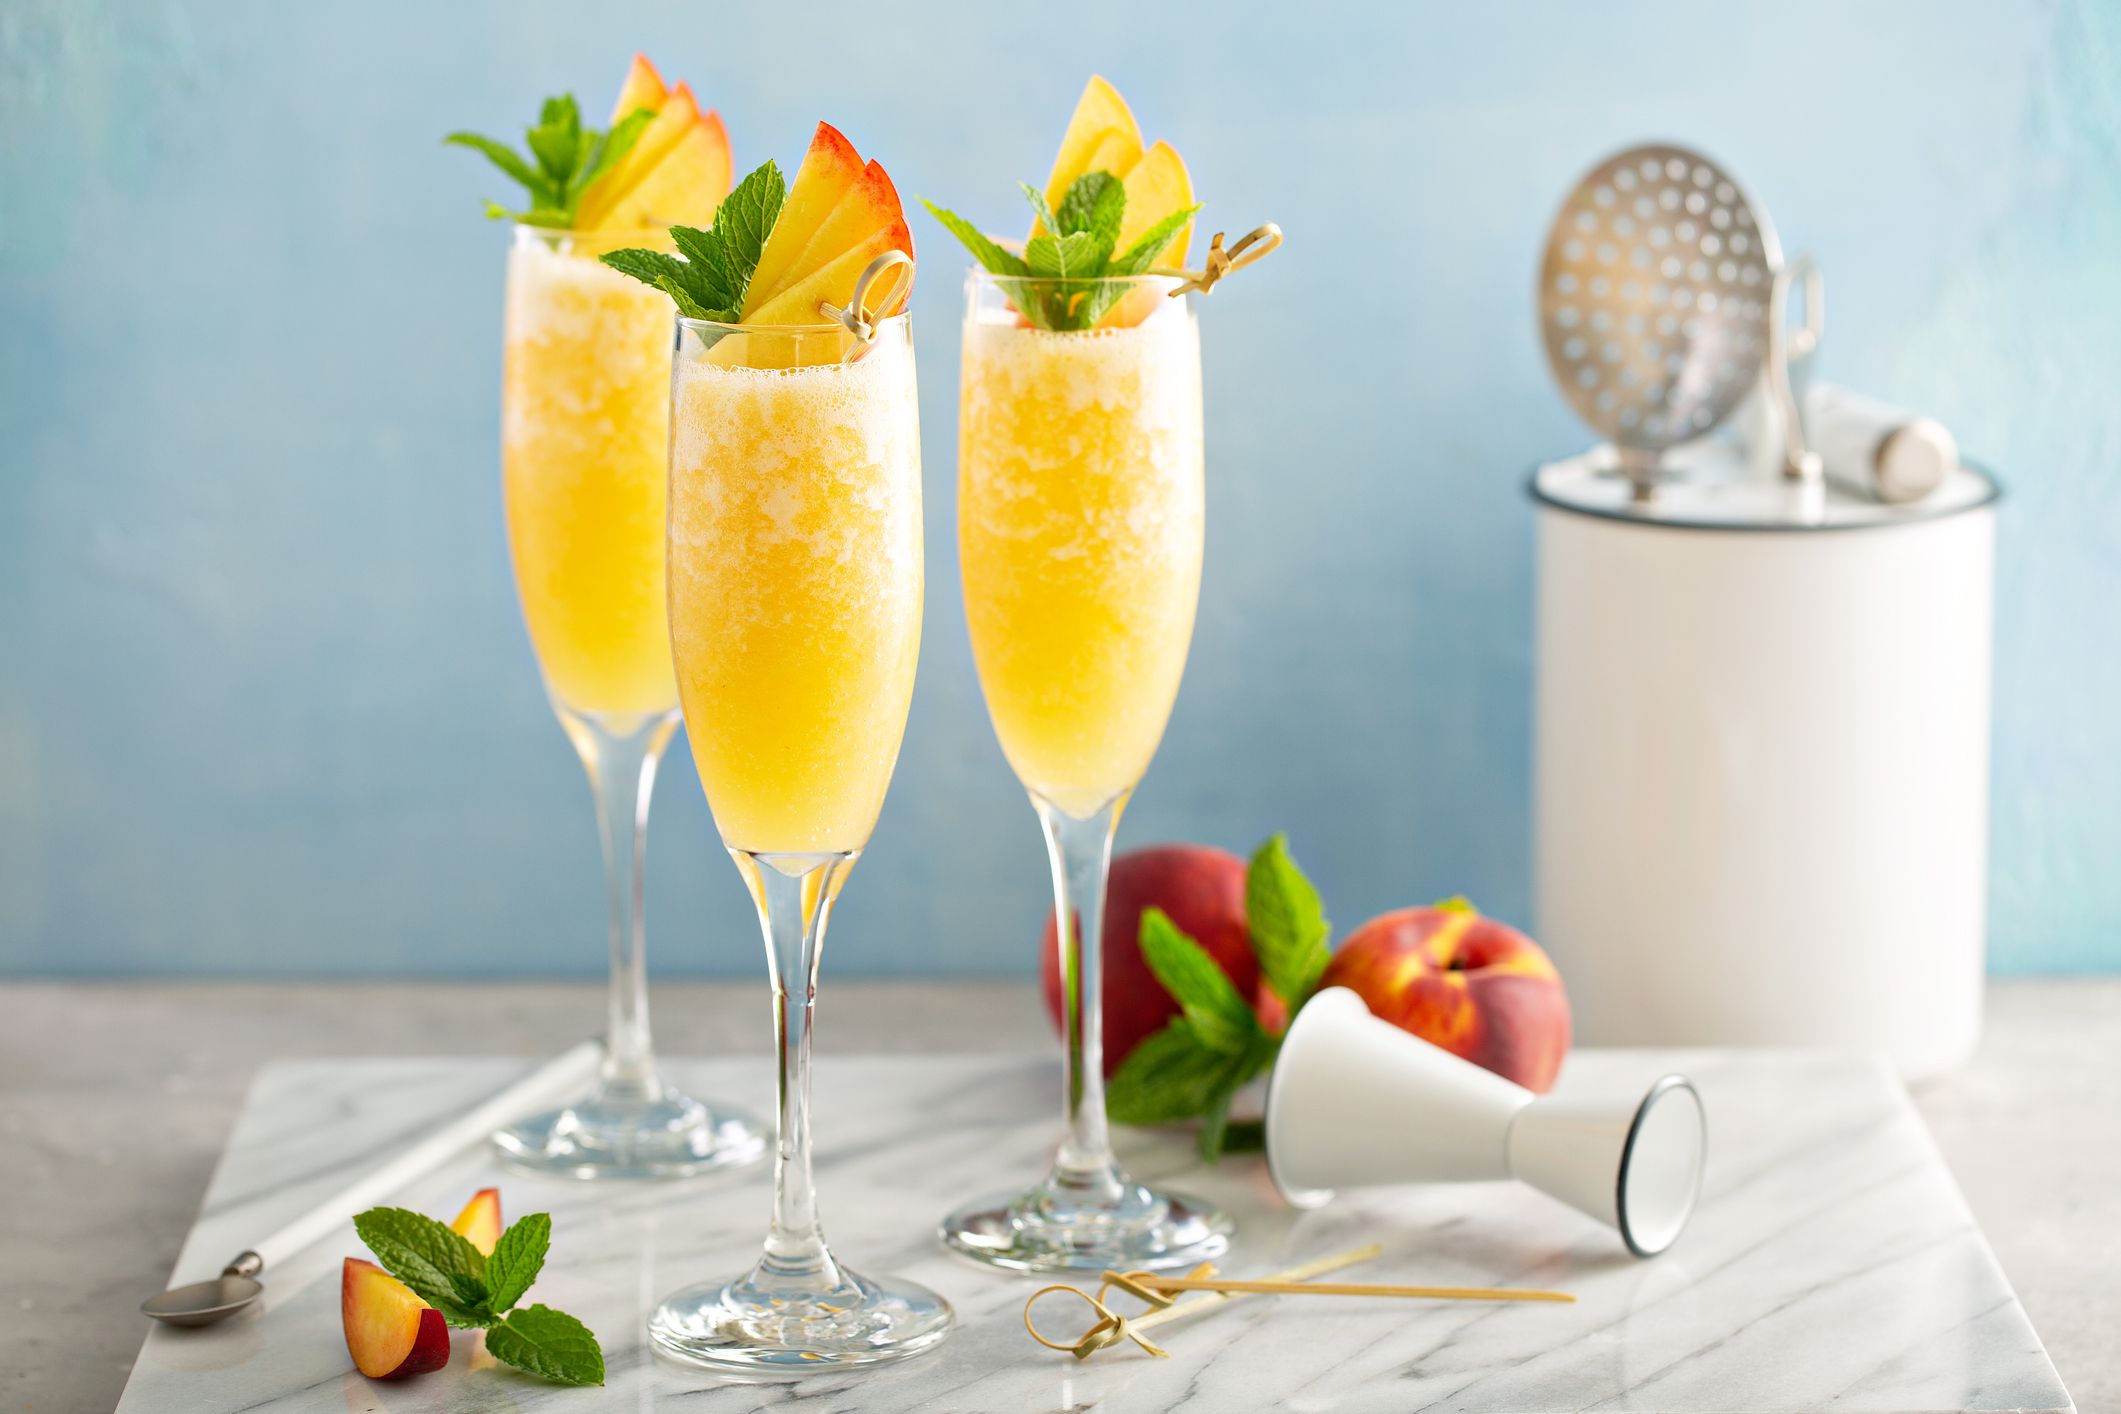 Holiday Mimosas to Make in An Ice Cube Tray